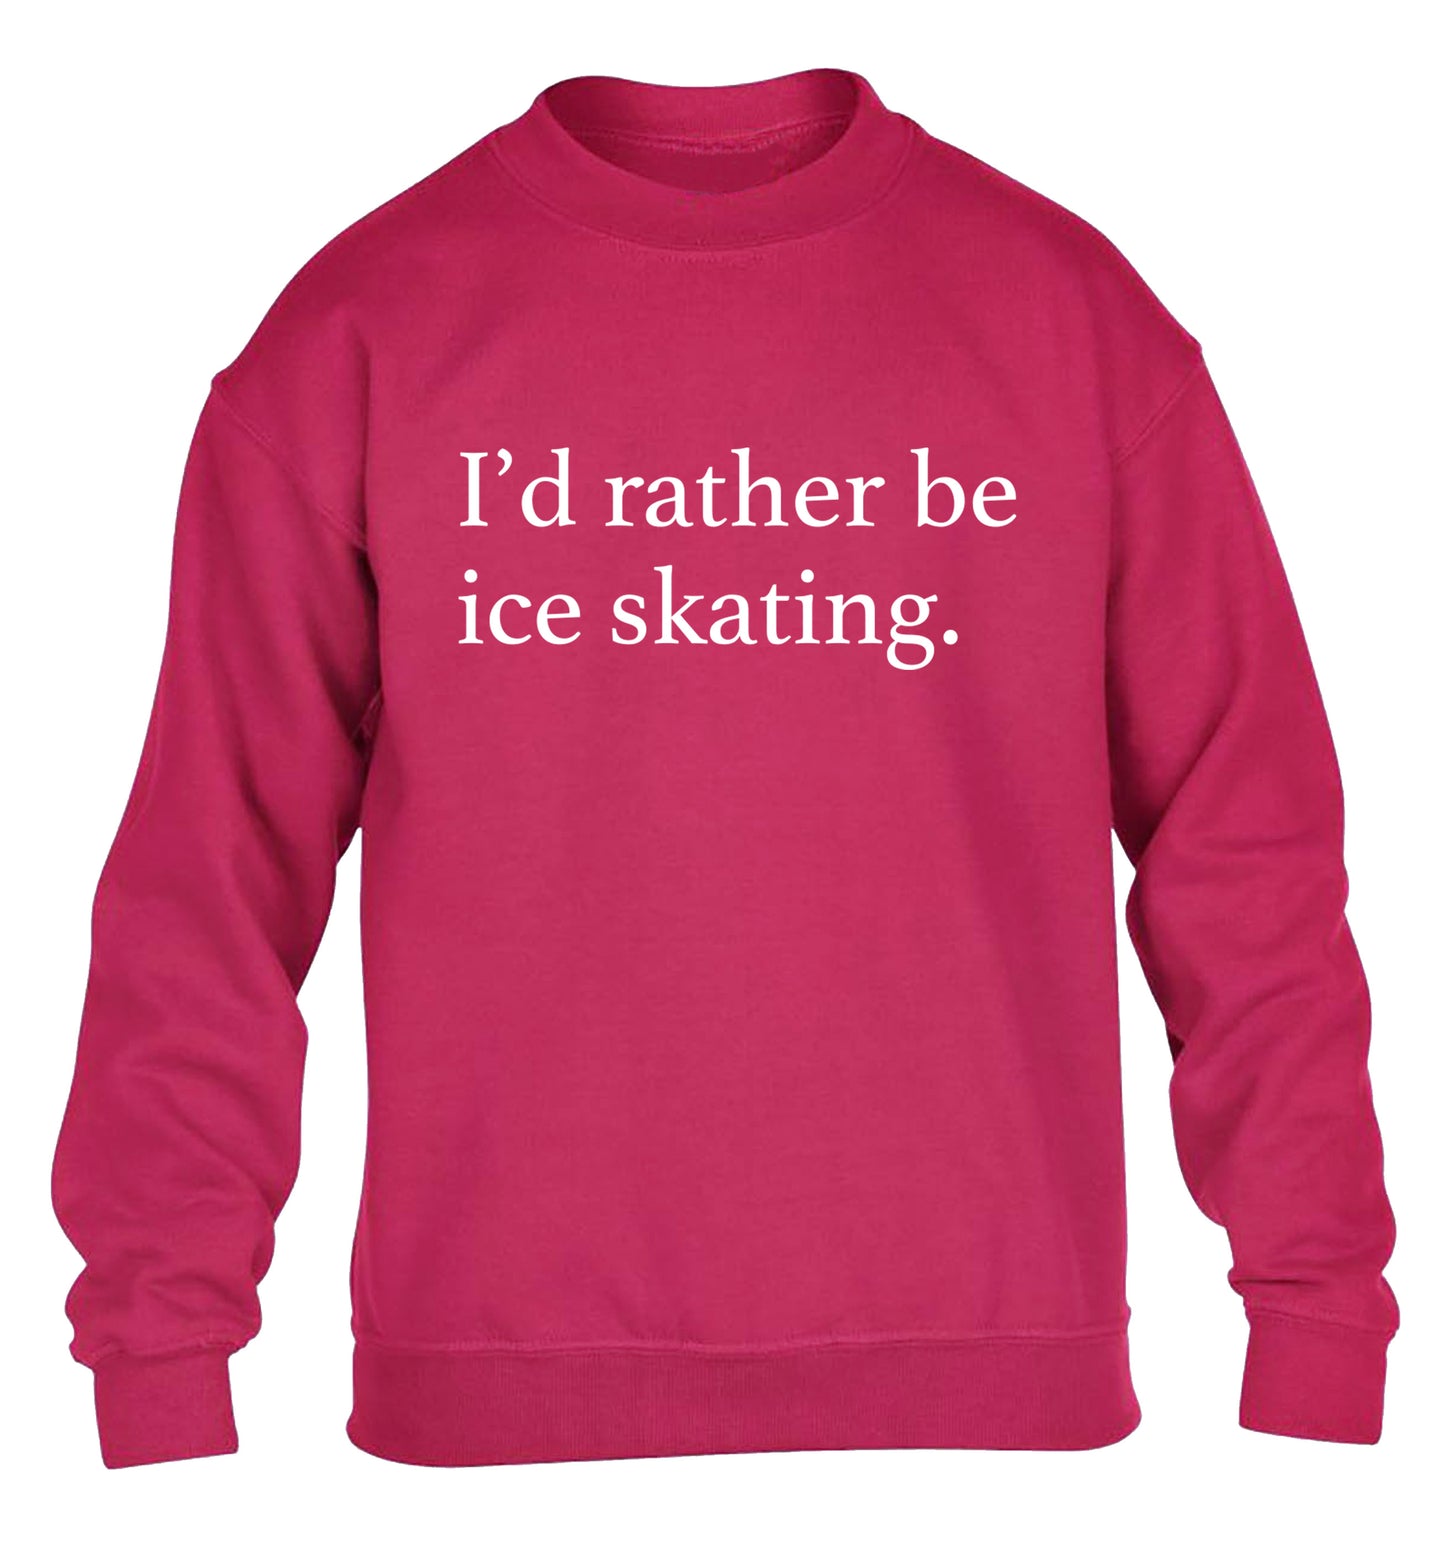 I'd rather be ice skating children's pink sweater 12-14 Years